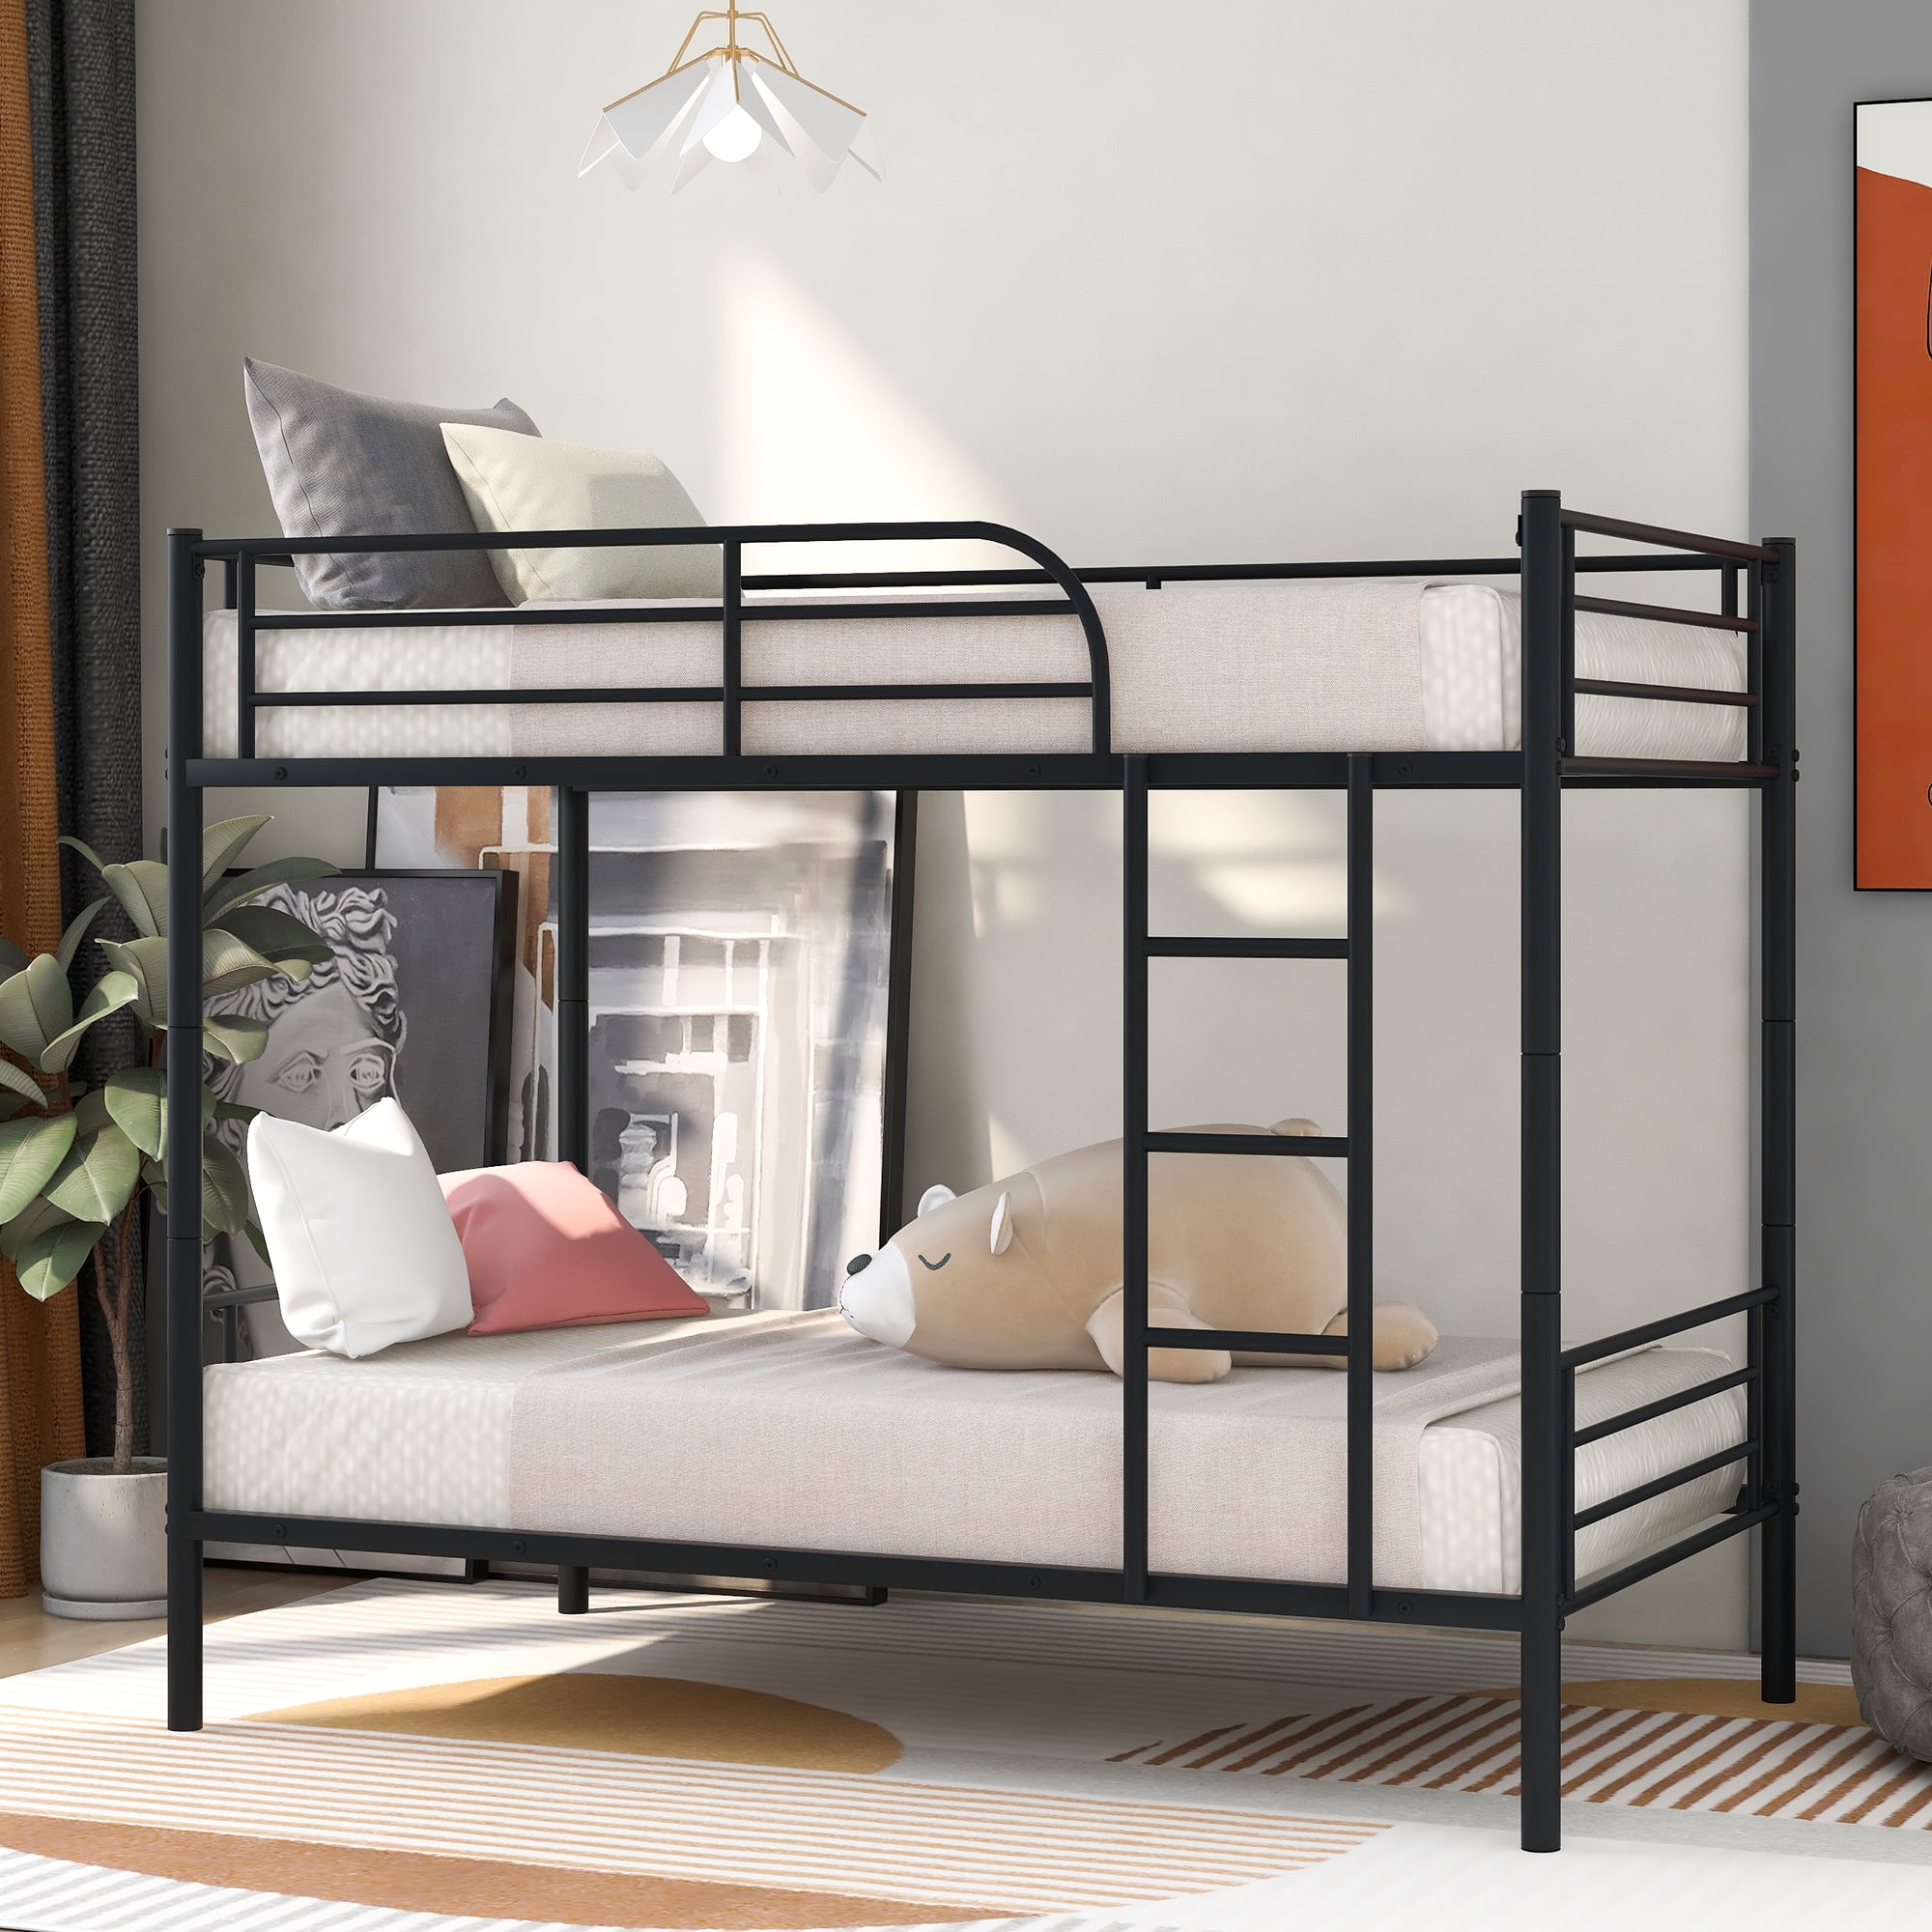 Bunk Bed Frame Twin Iron, How Much Does A Bunk Bed Weigh